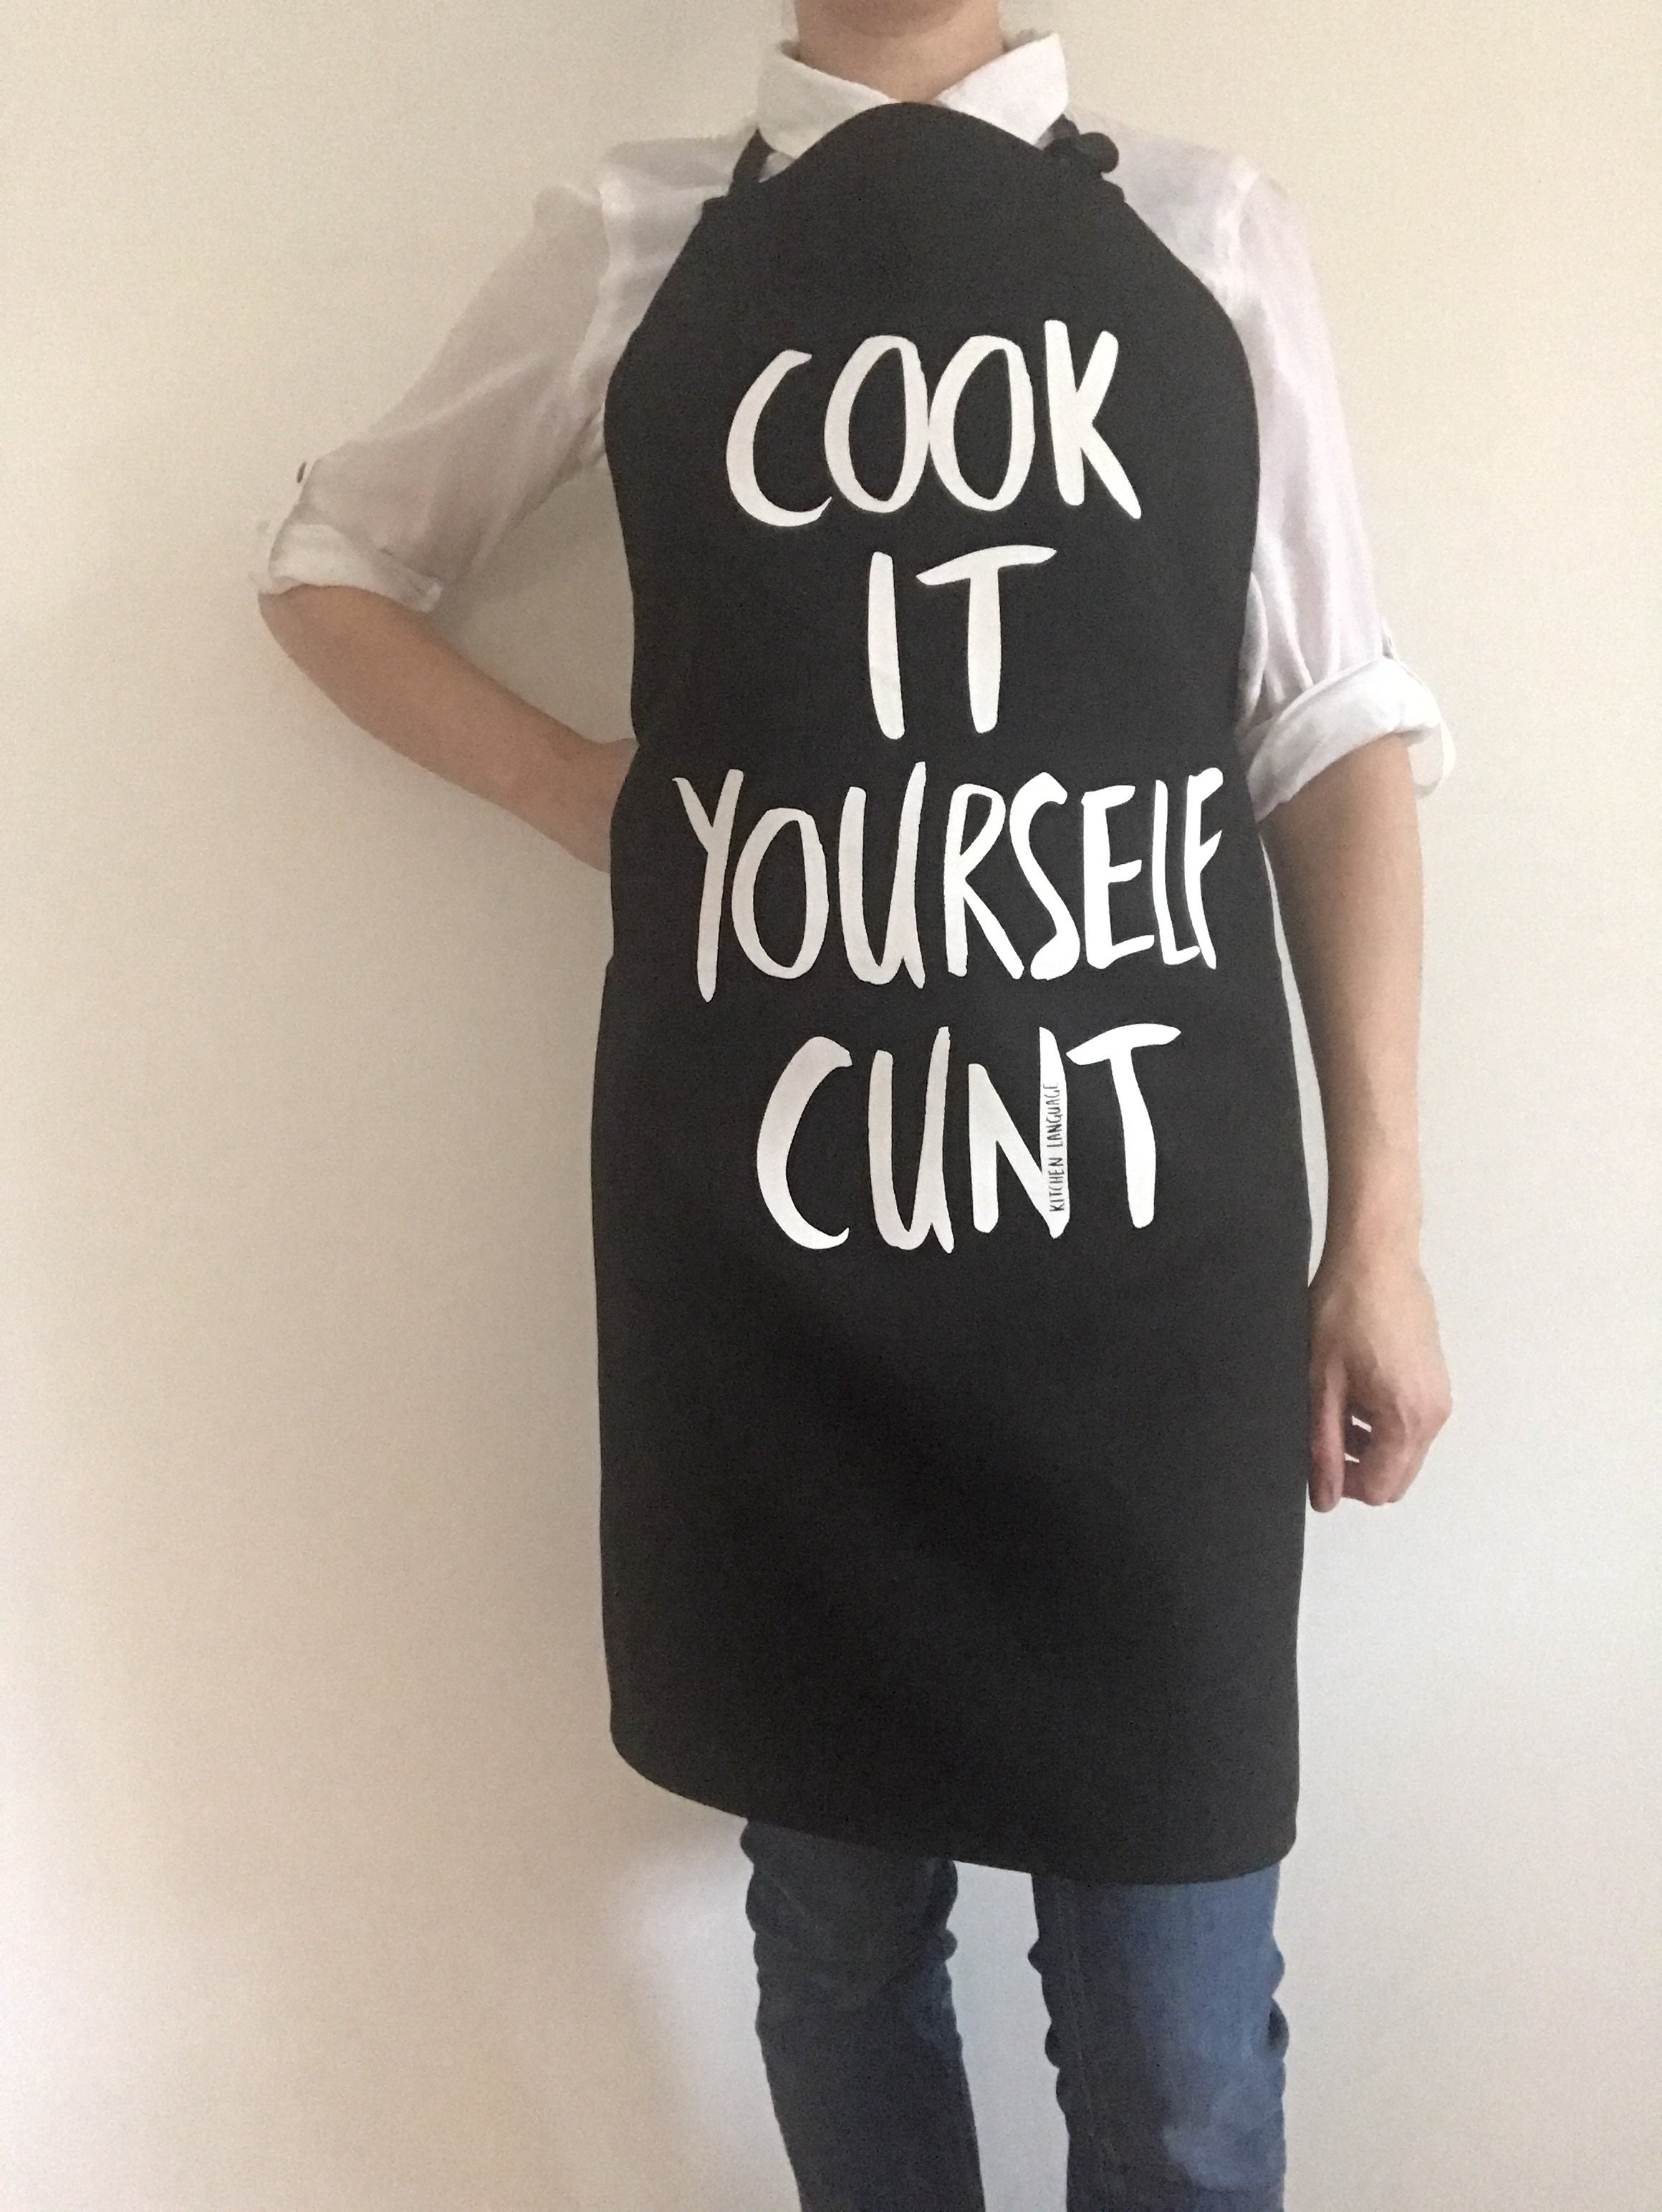 Naughty Apron - Cook it Yourself C*nt!